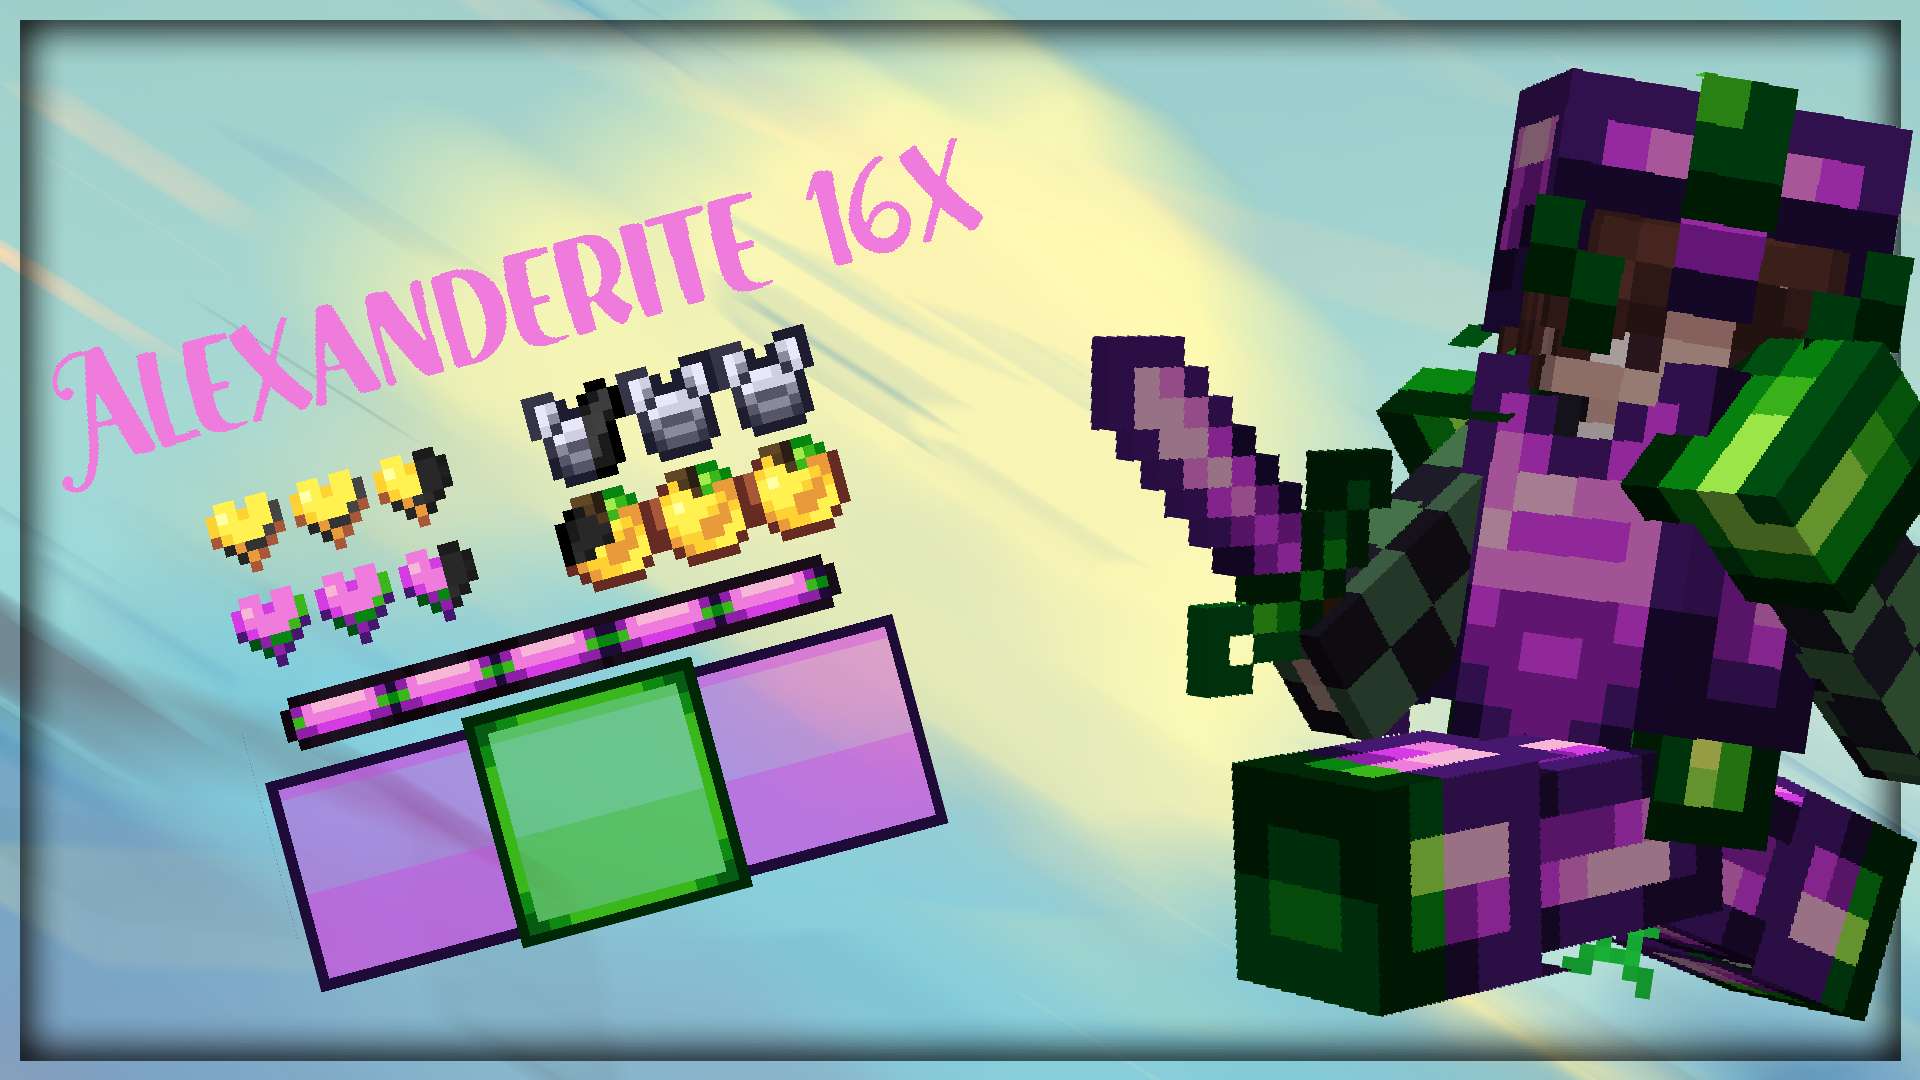 Gallery Banner for Alexanderite  on PvPRP